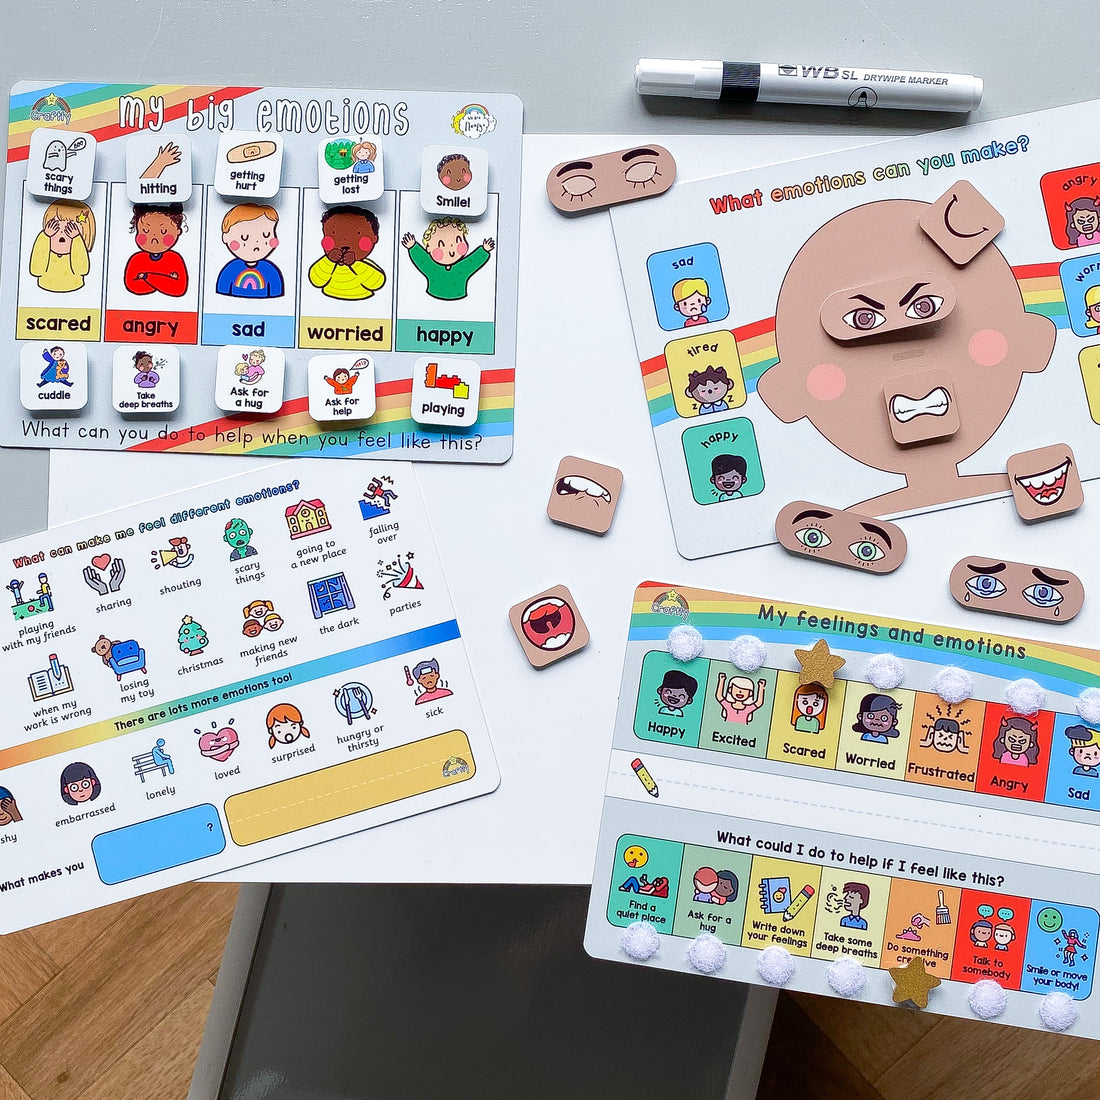 Children's Emotions and Feelings 😫🙂😛 - Craftly July Subscription